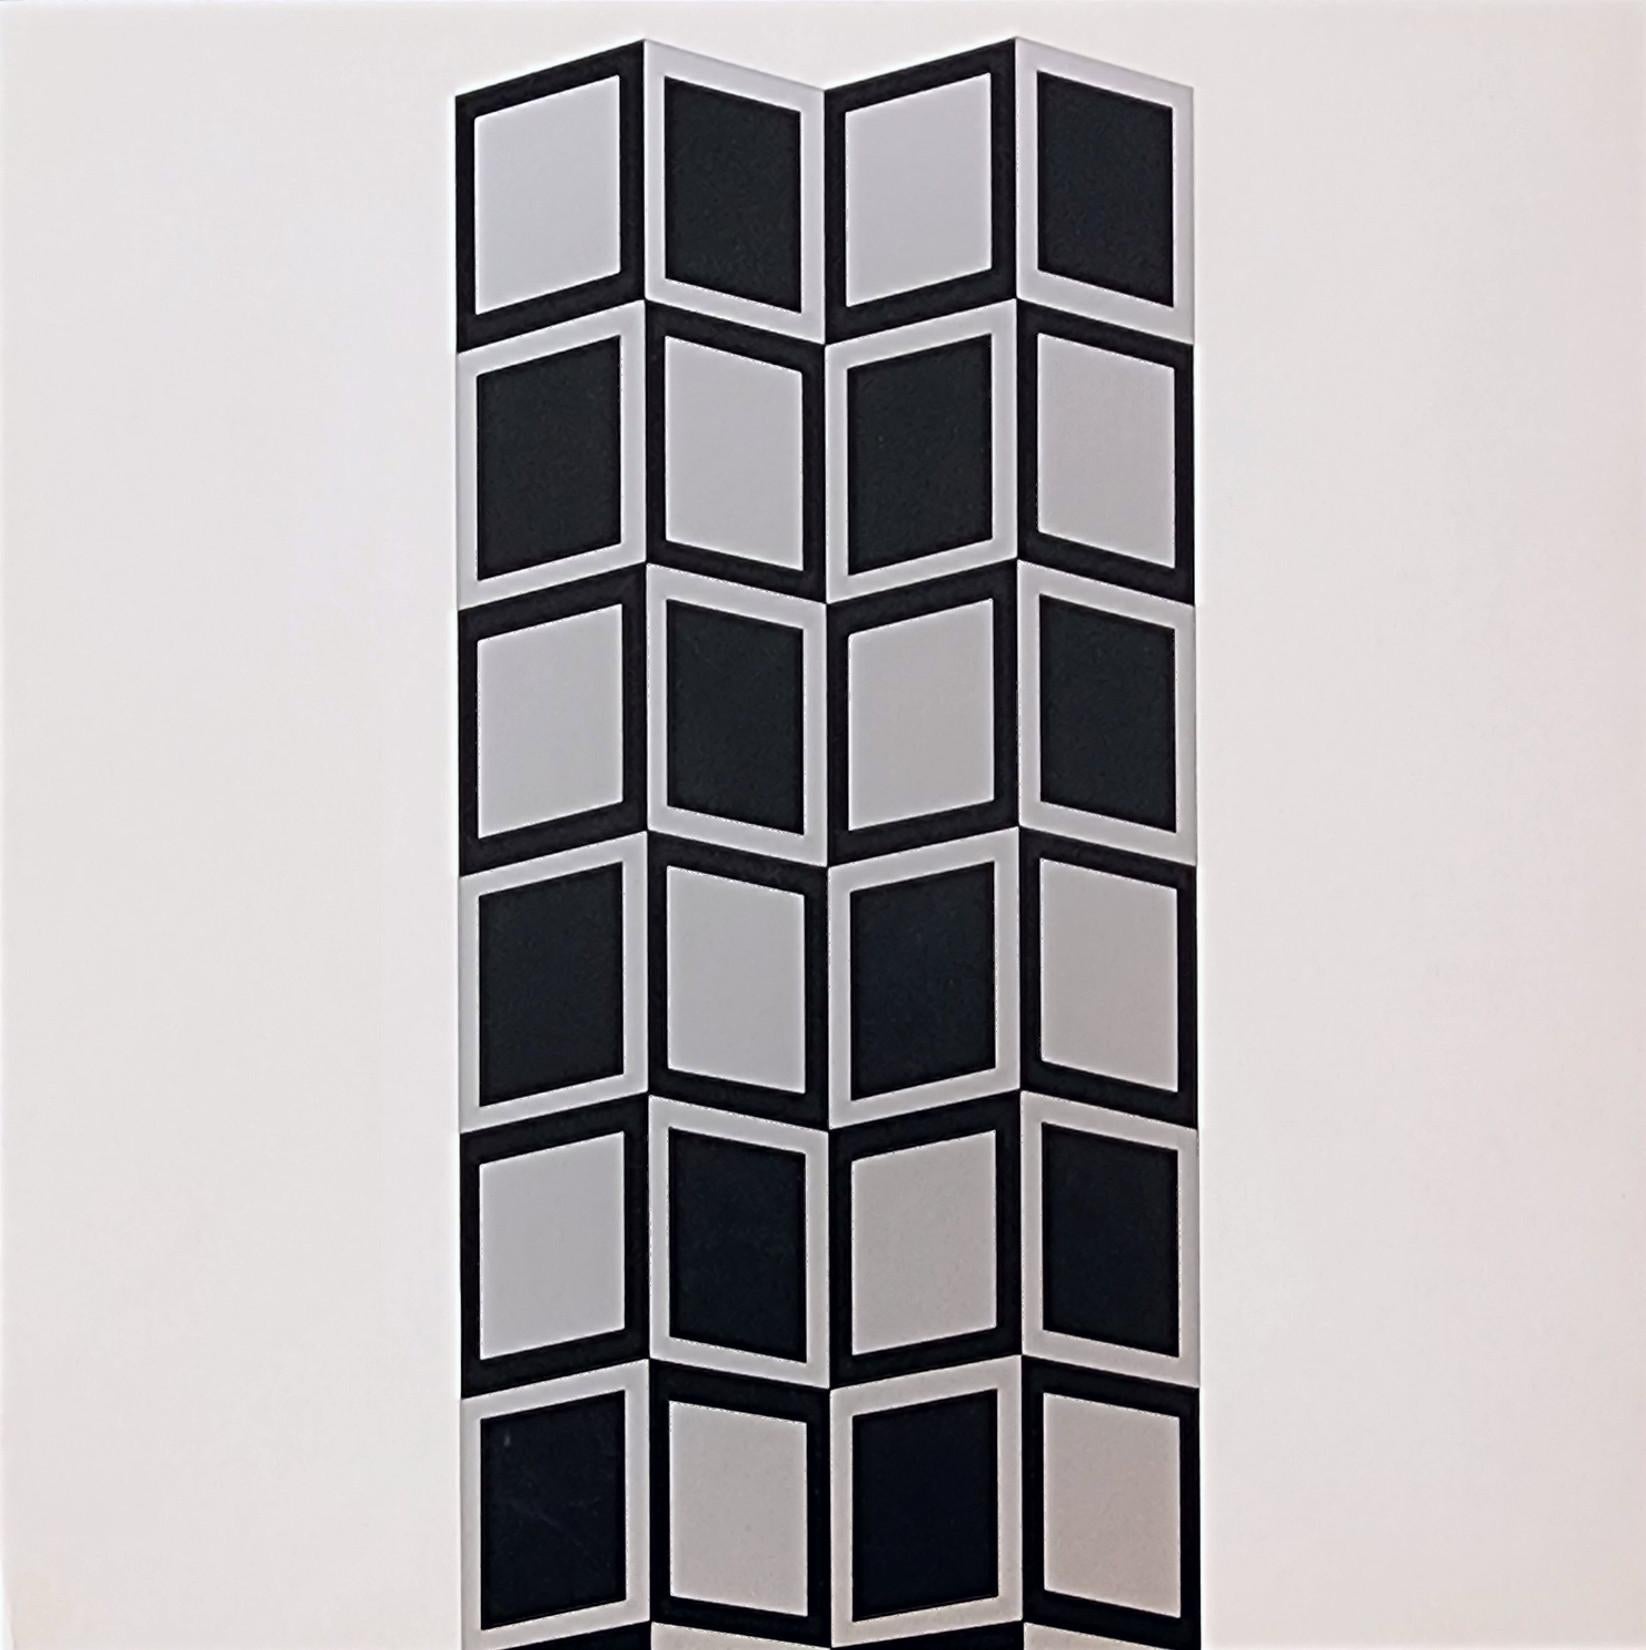 Saeule HK (Detail), 1967 (~36% OFF LIMITED TIME ONLY) – Print von Victor Vasarely